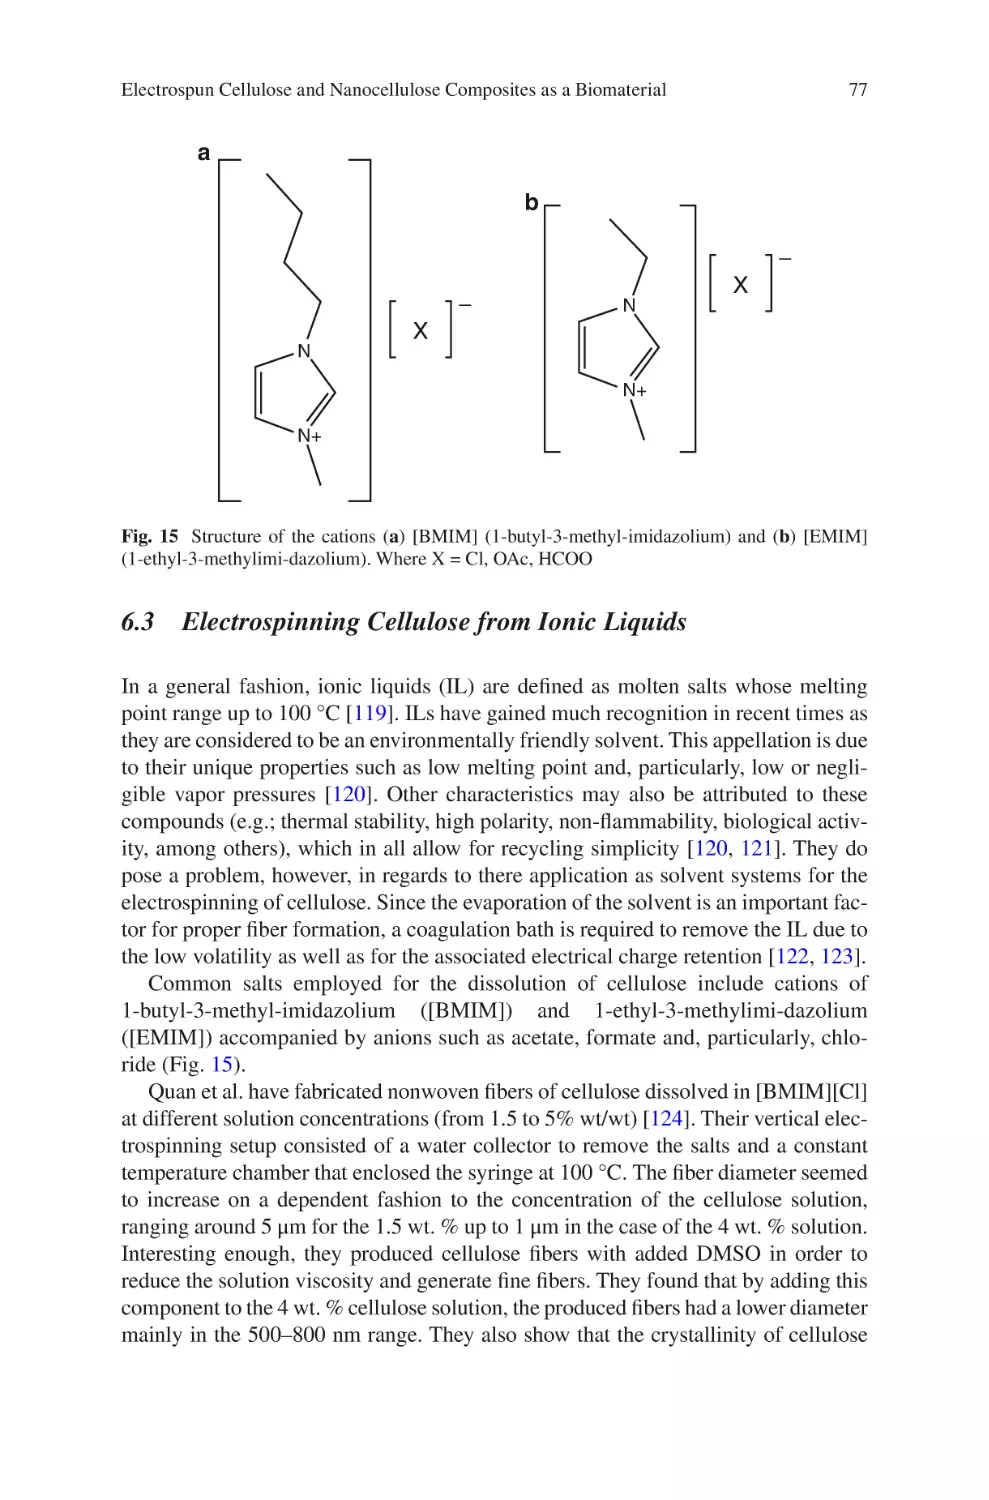 6.3 Electrospinning Cellulose from Ionic Liquids